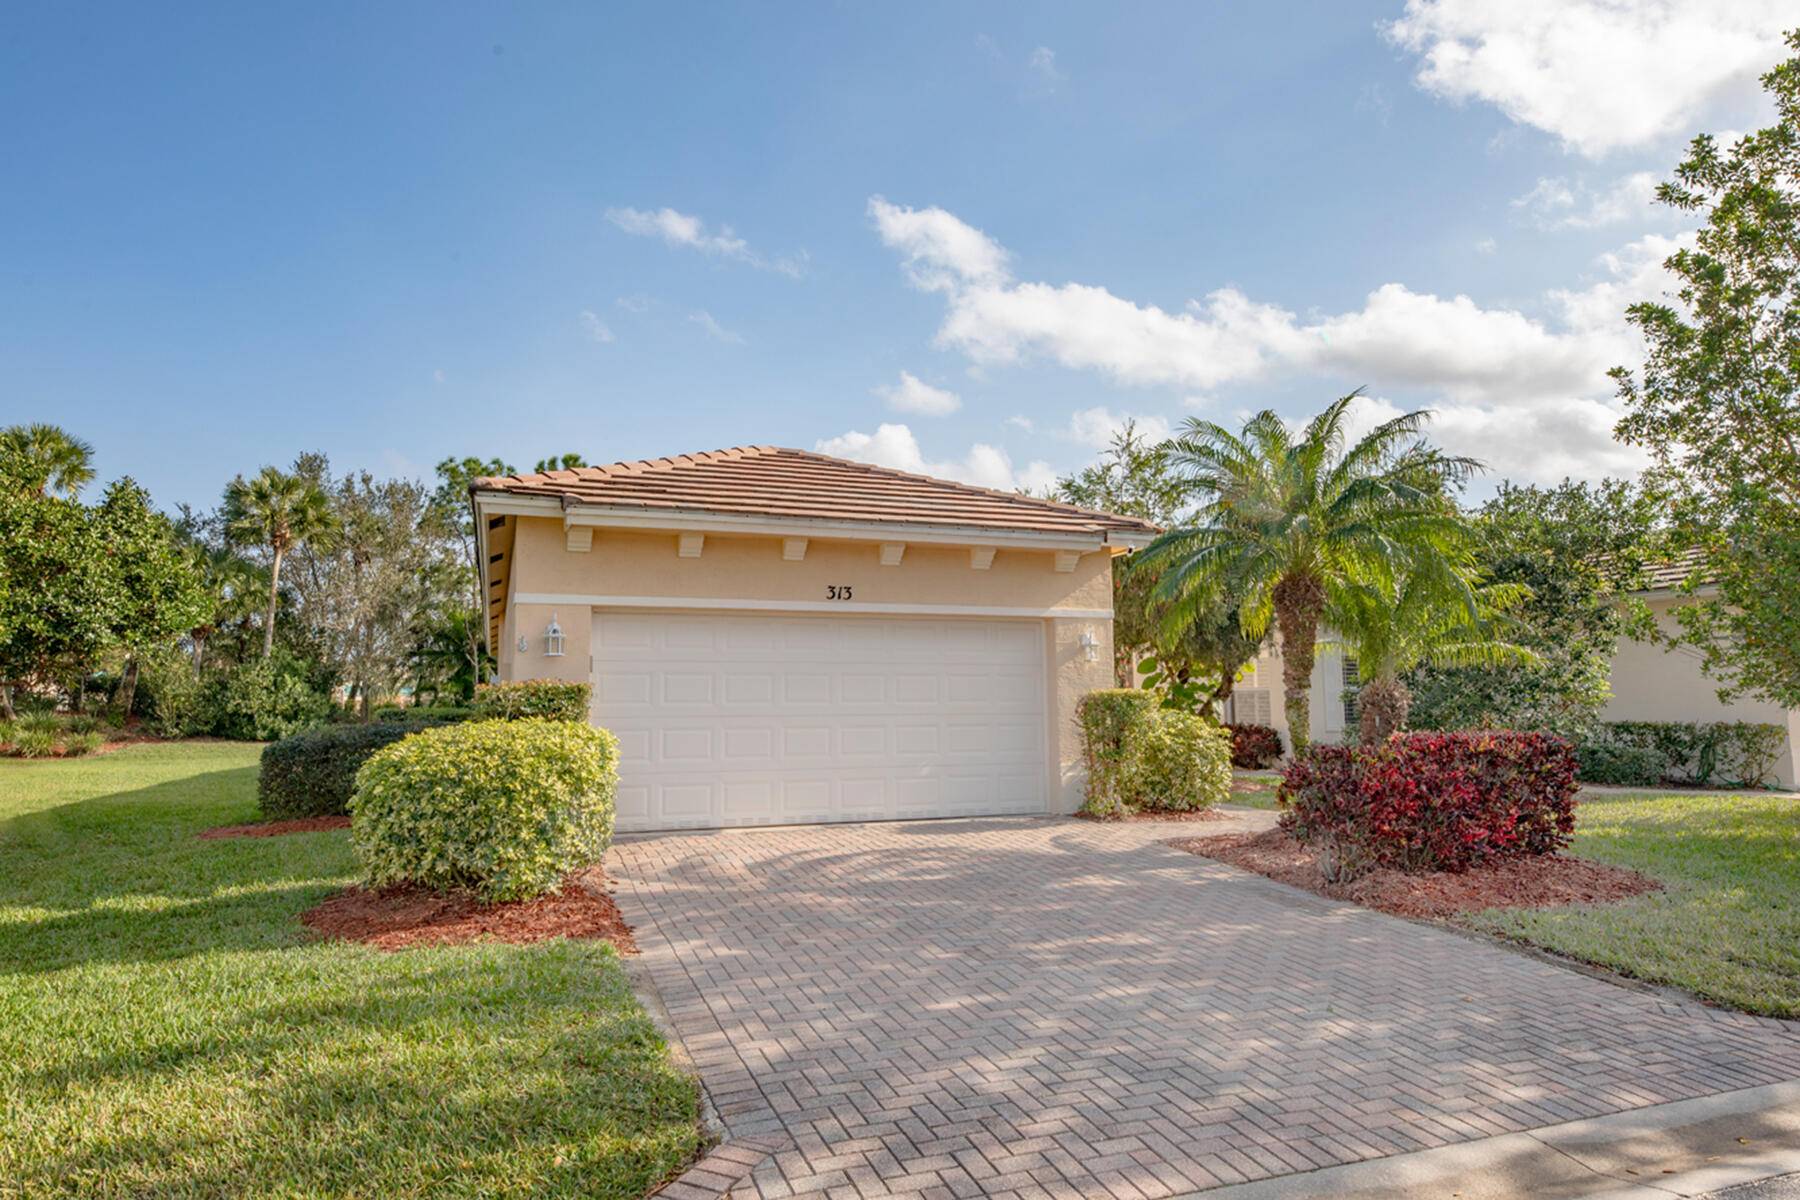 Introducing a stunning 2 2 in the heart of Port Saint Lucie West.